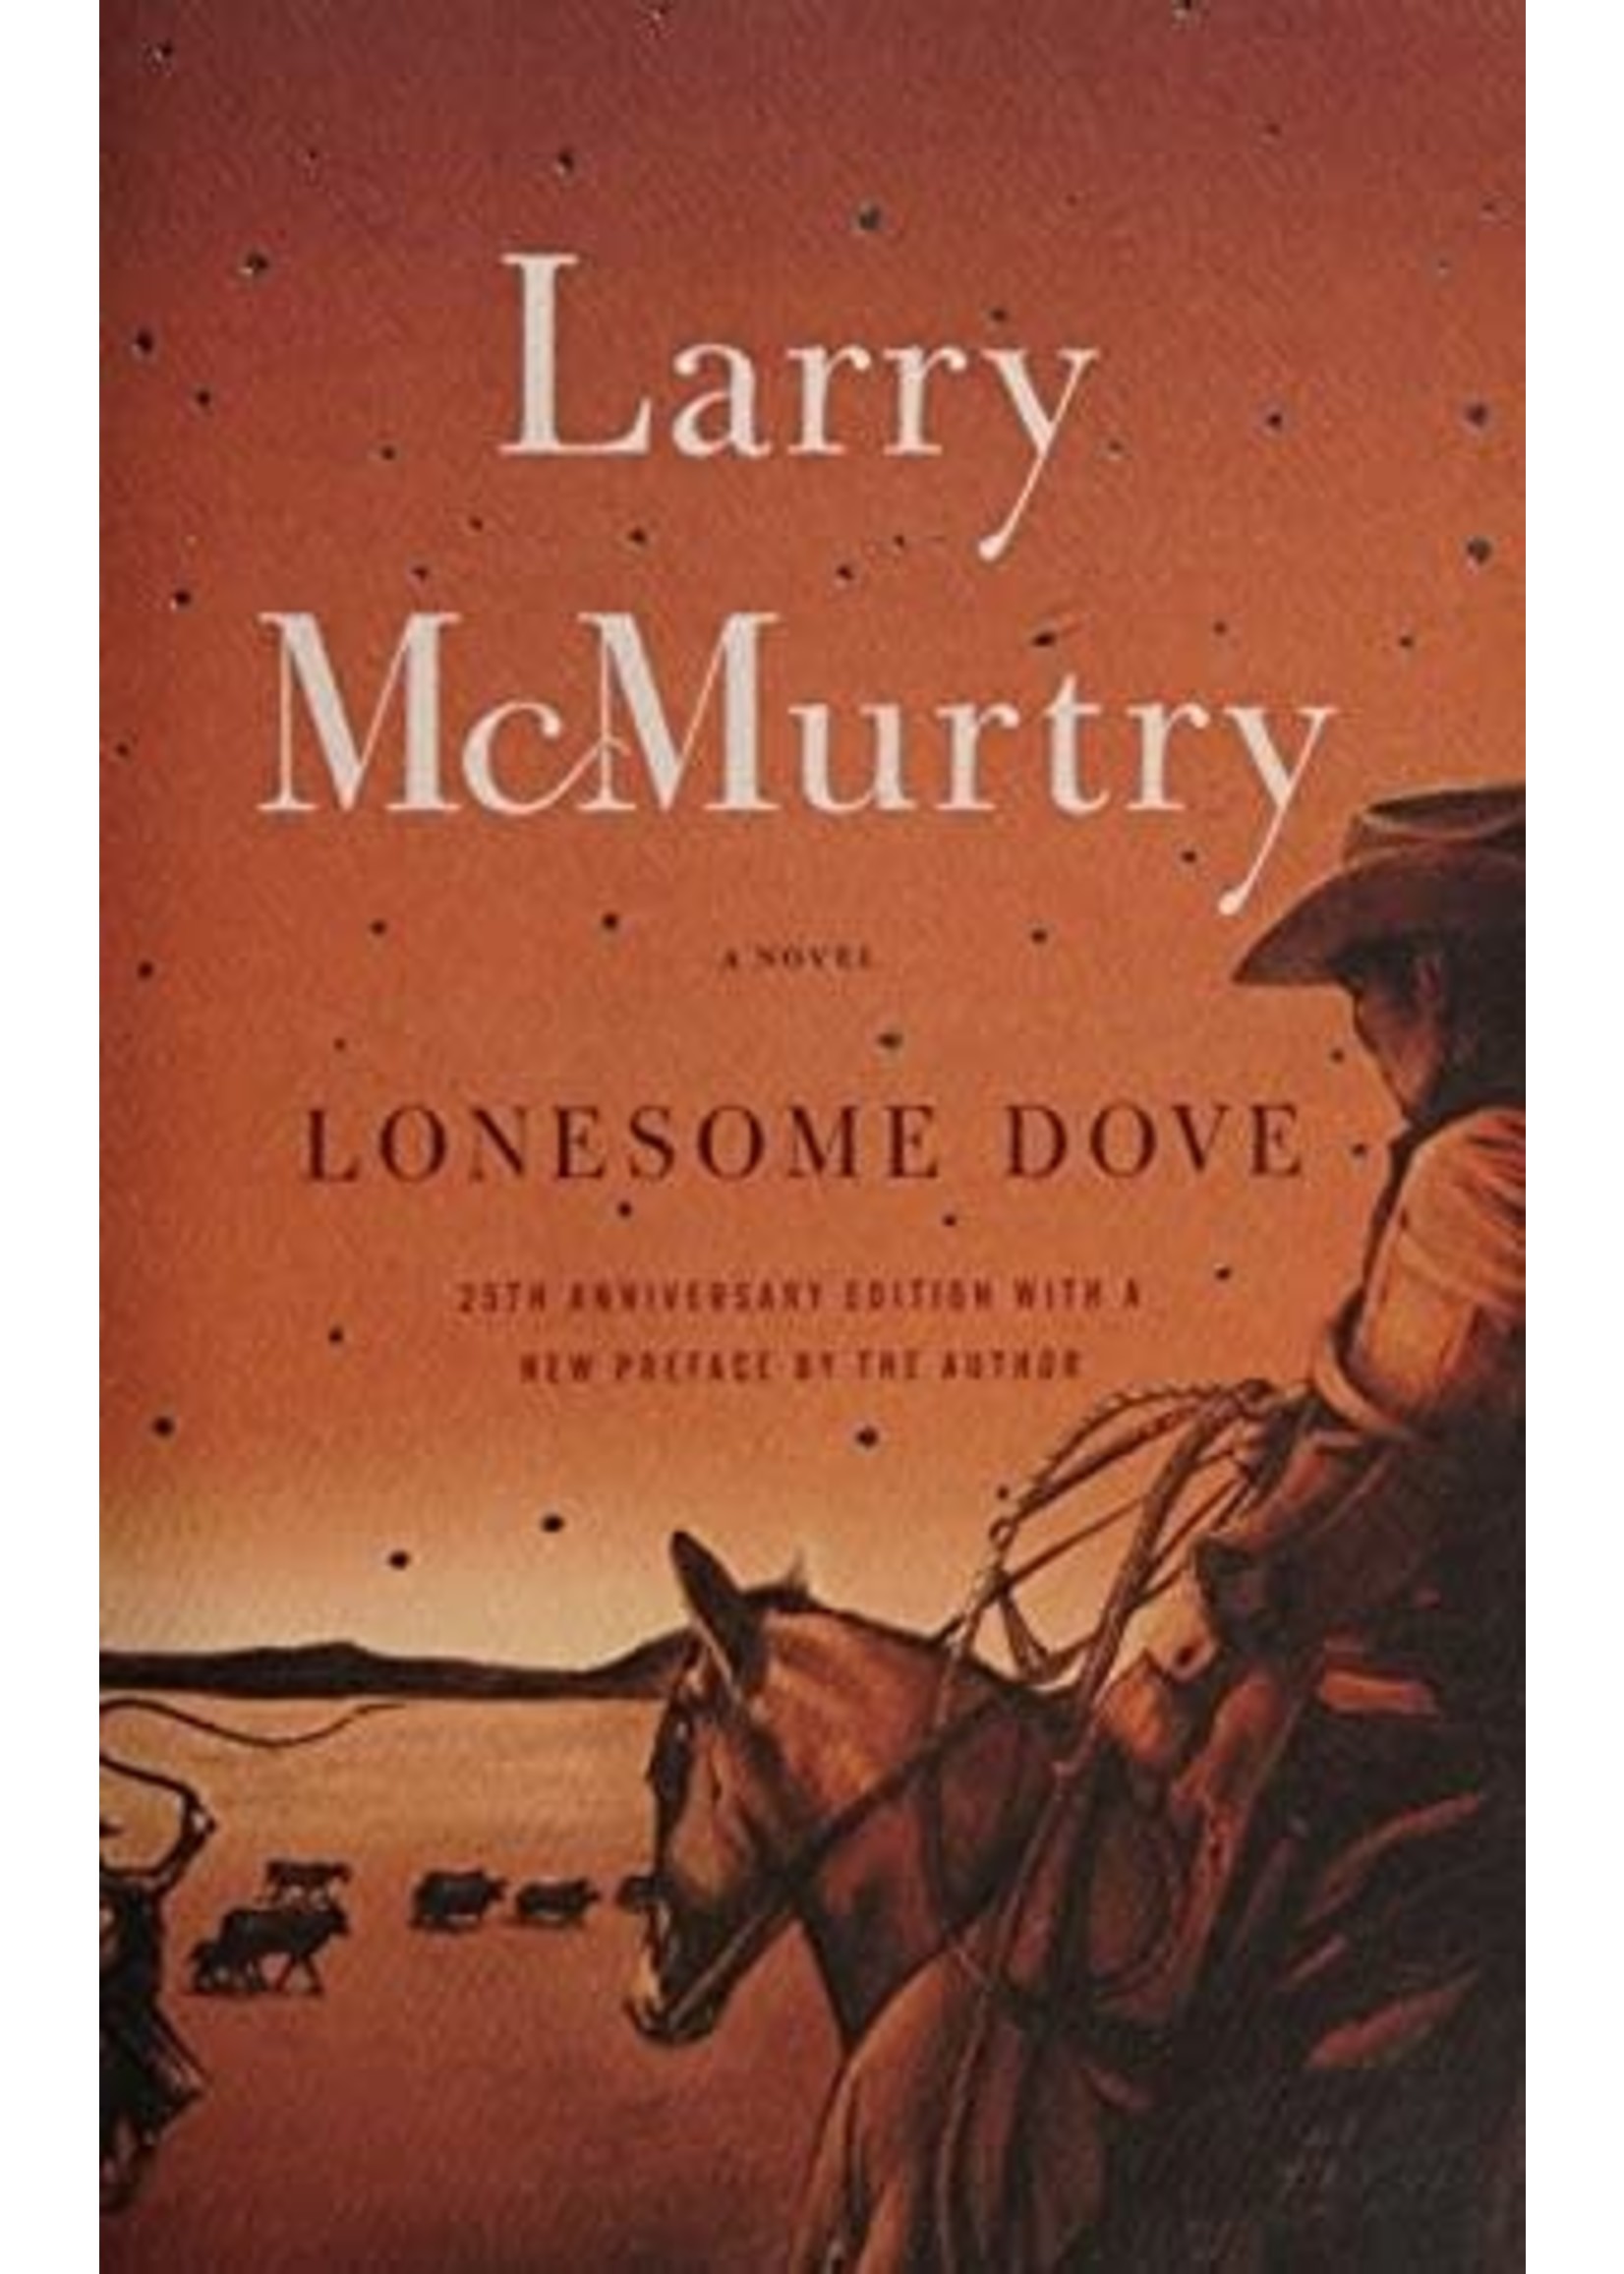 Lonesome Dove (Lonesome Dove #1) by Larry McMurtry